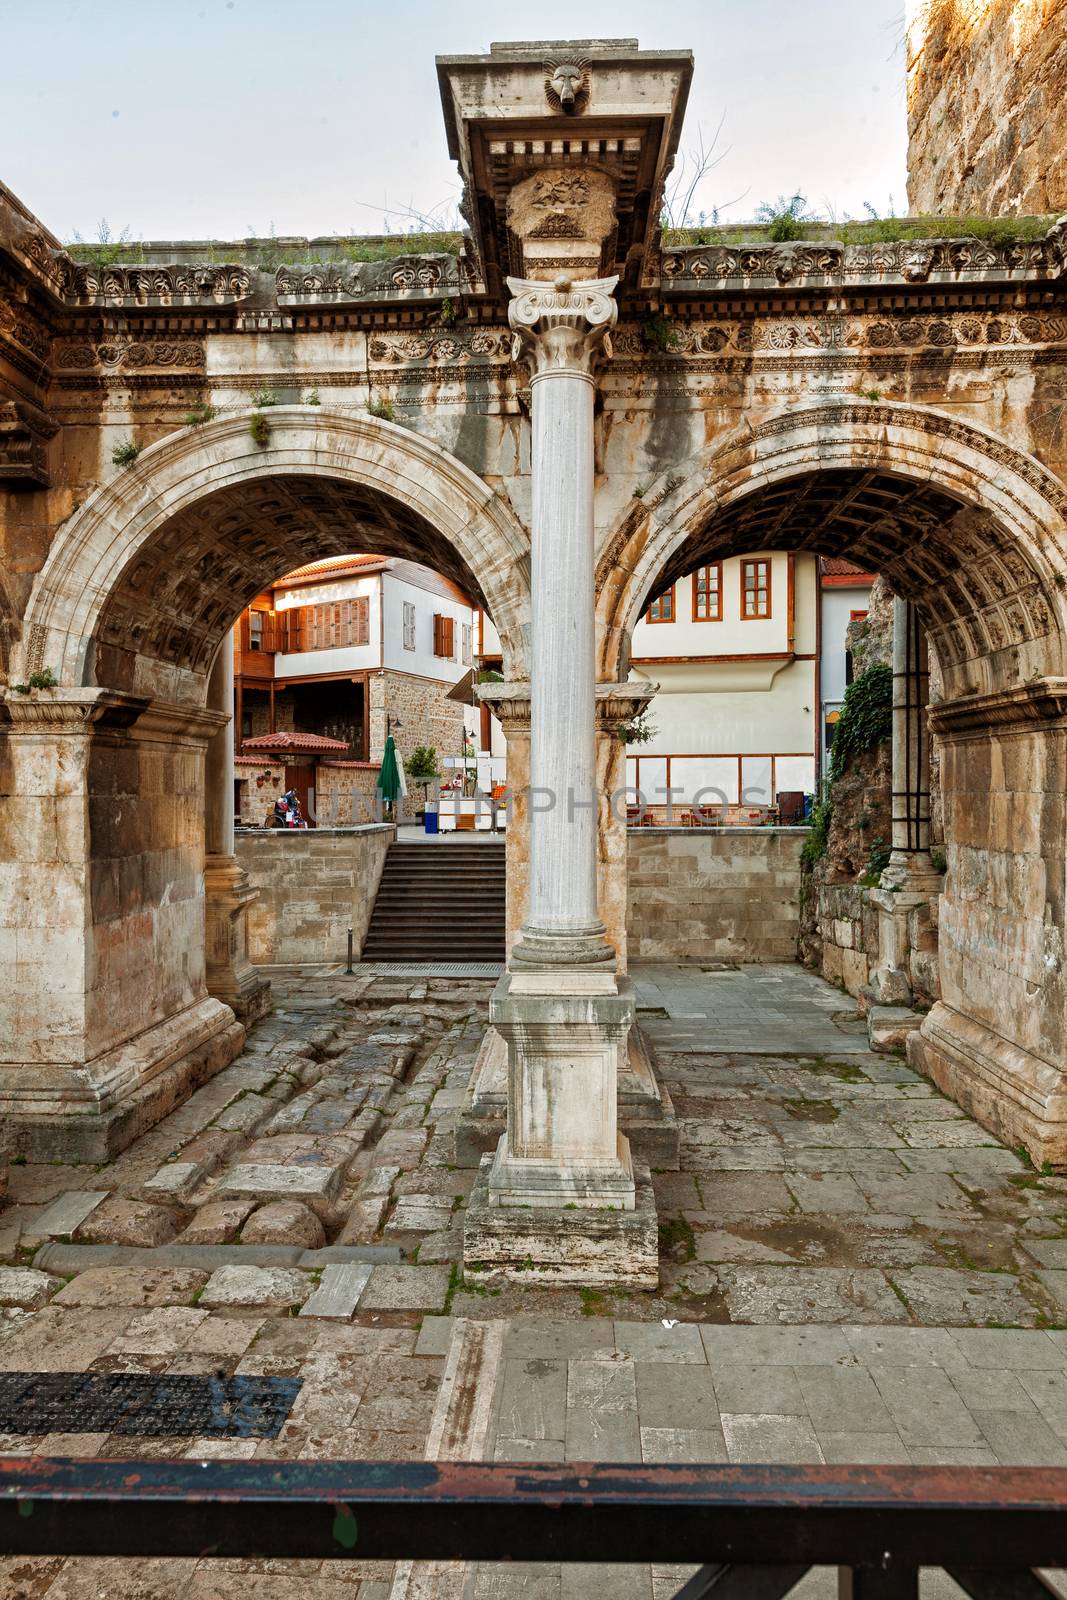 The Hadriyan's Gate in Antalya is a popular touristic place.